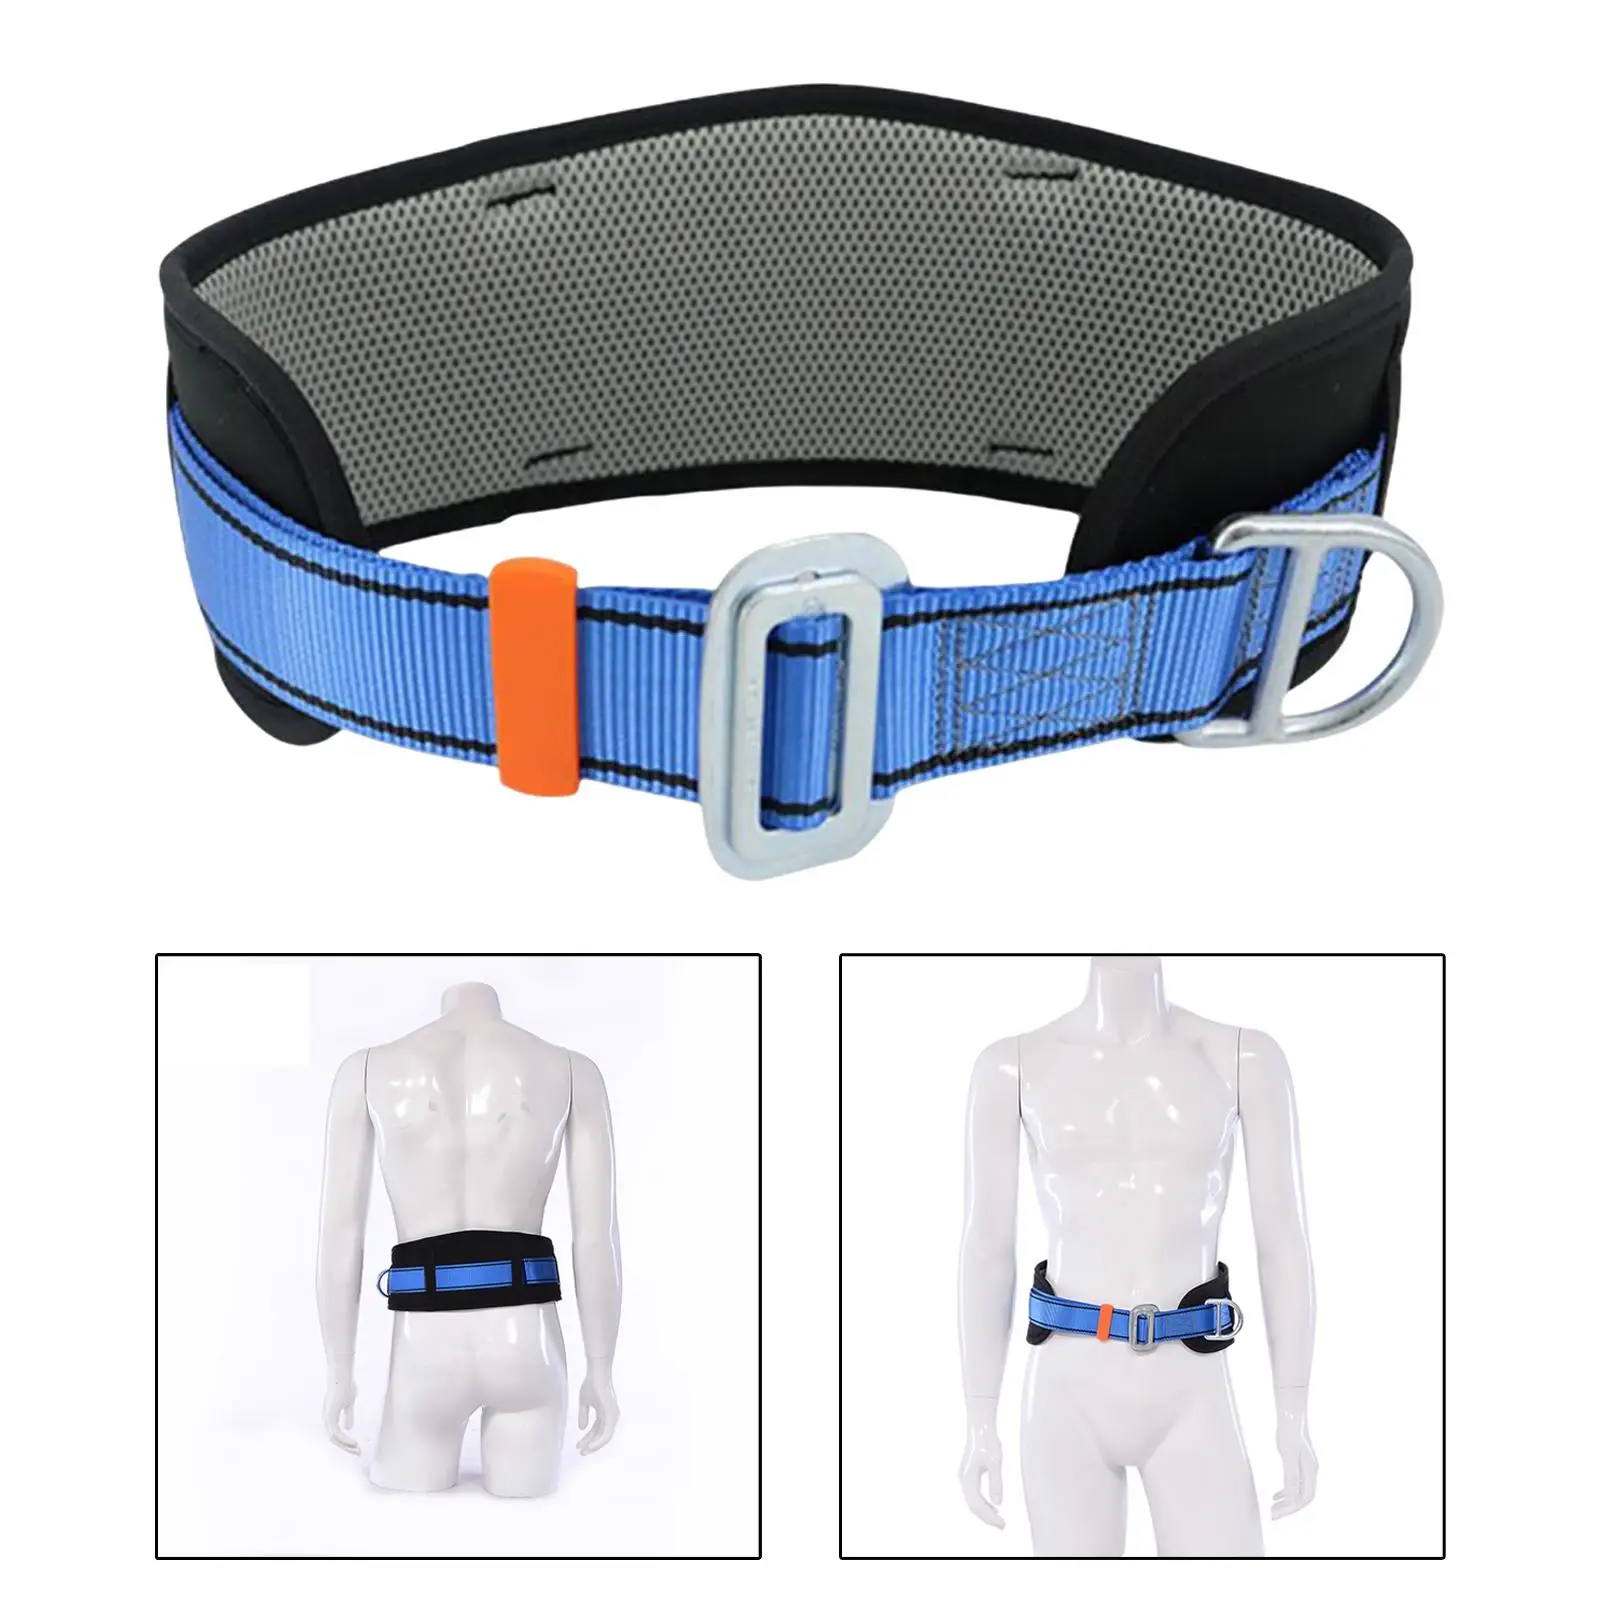 1x Single Hanging Point Lanyard Anti Falling Personal Waist Support Portable Safety Harness Belt for Aerial Work Climbing